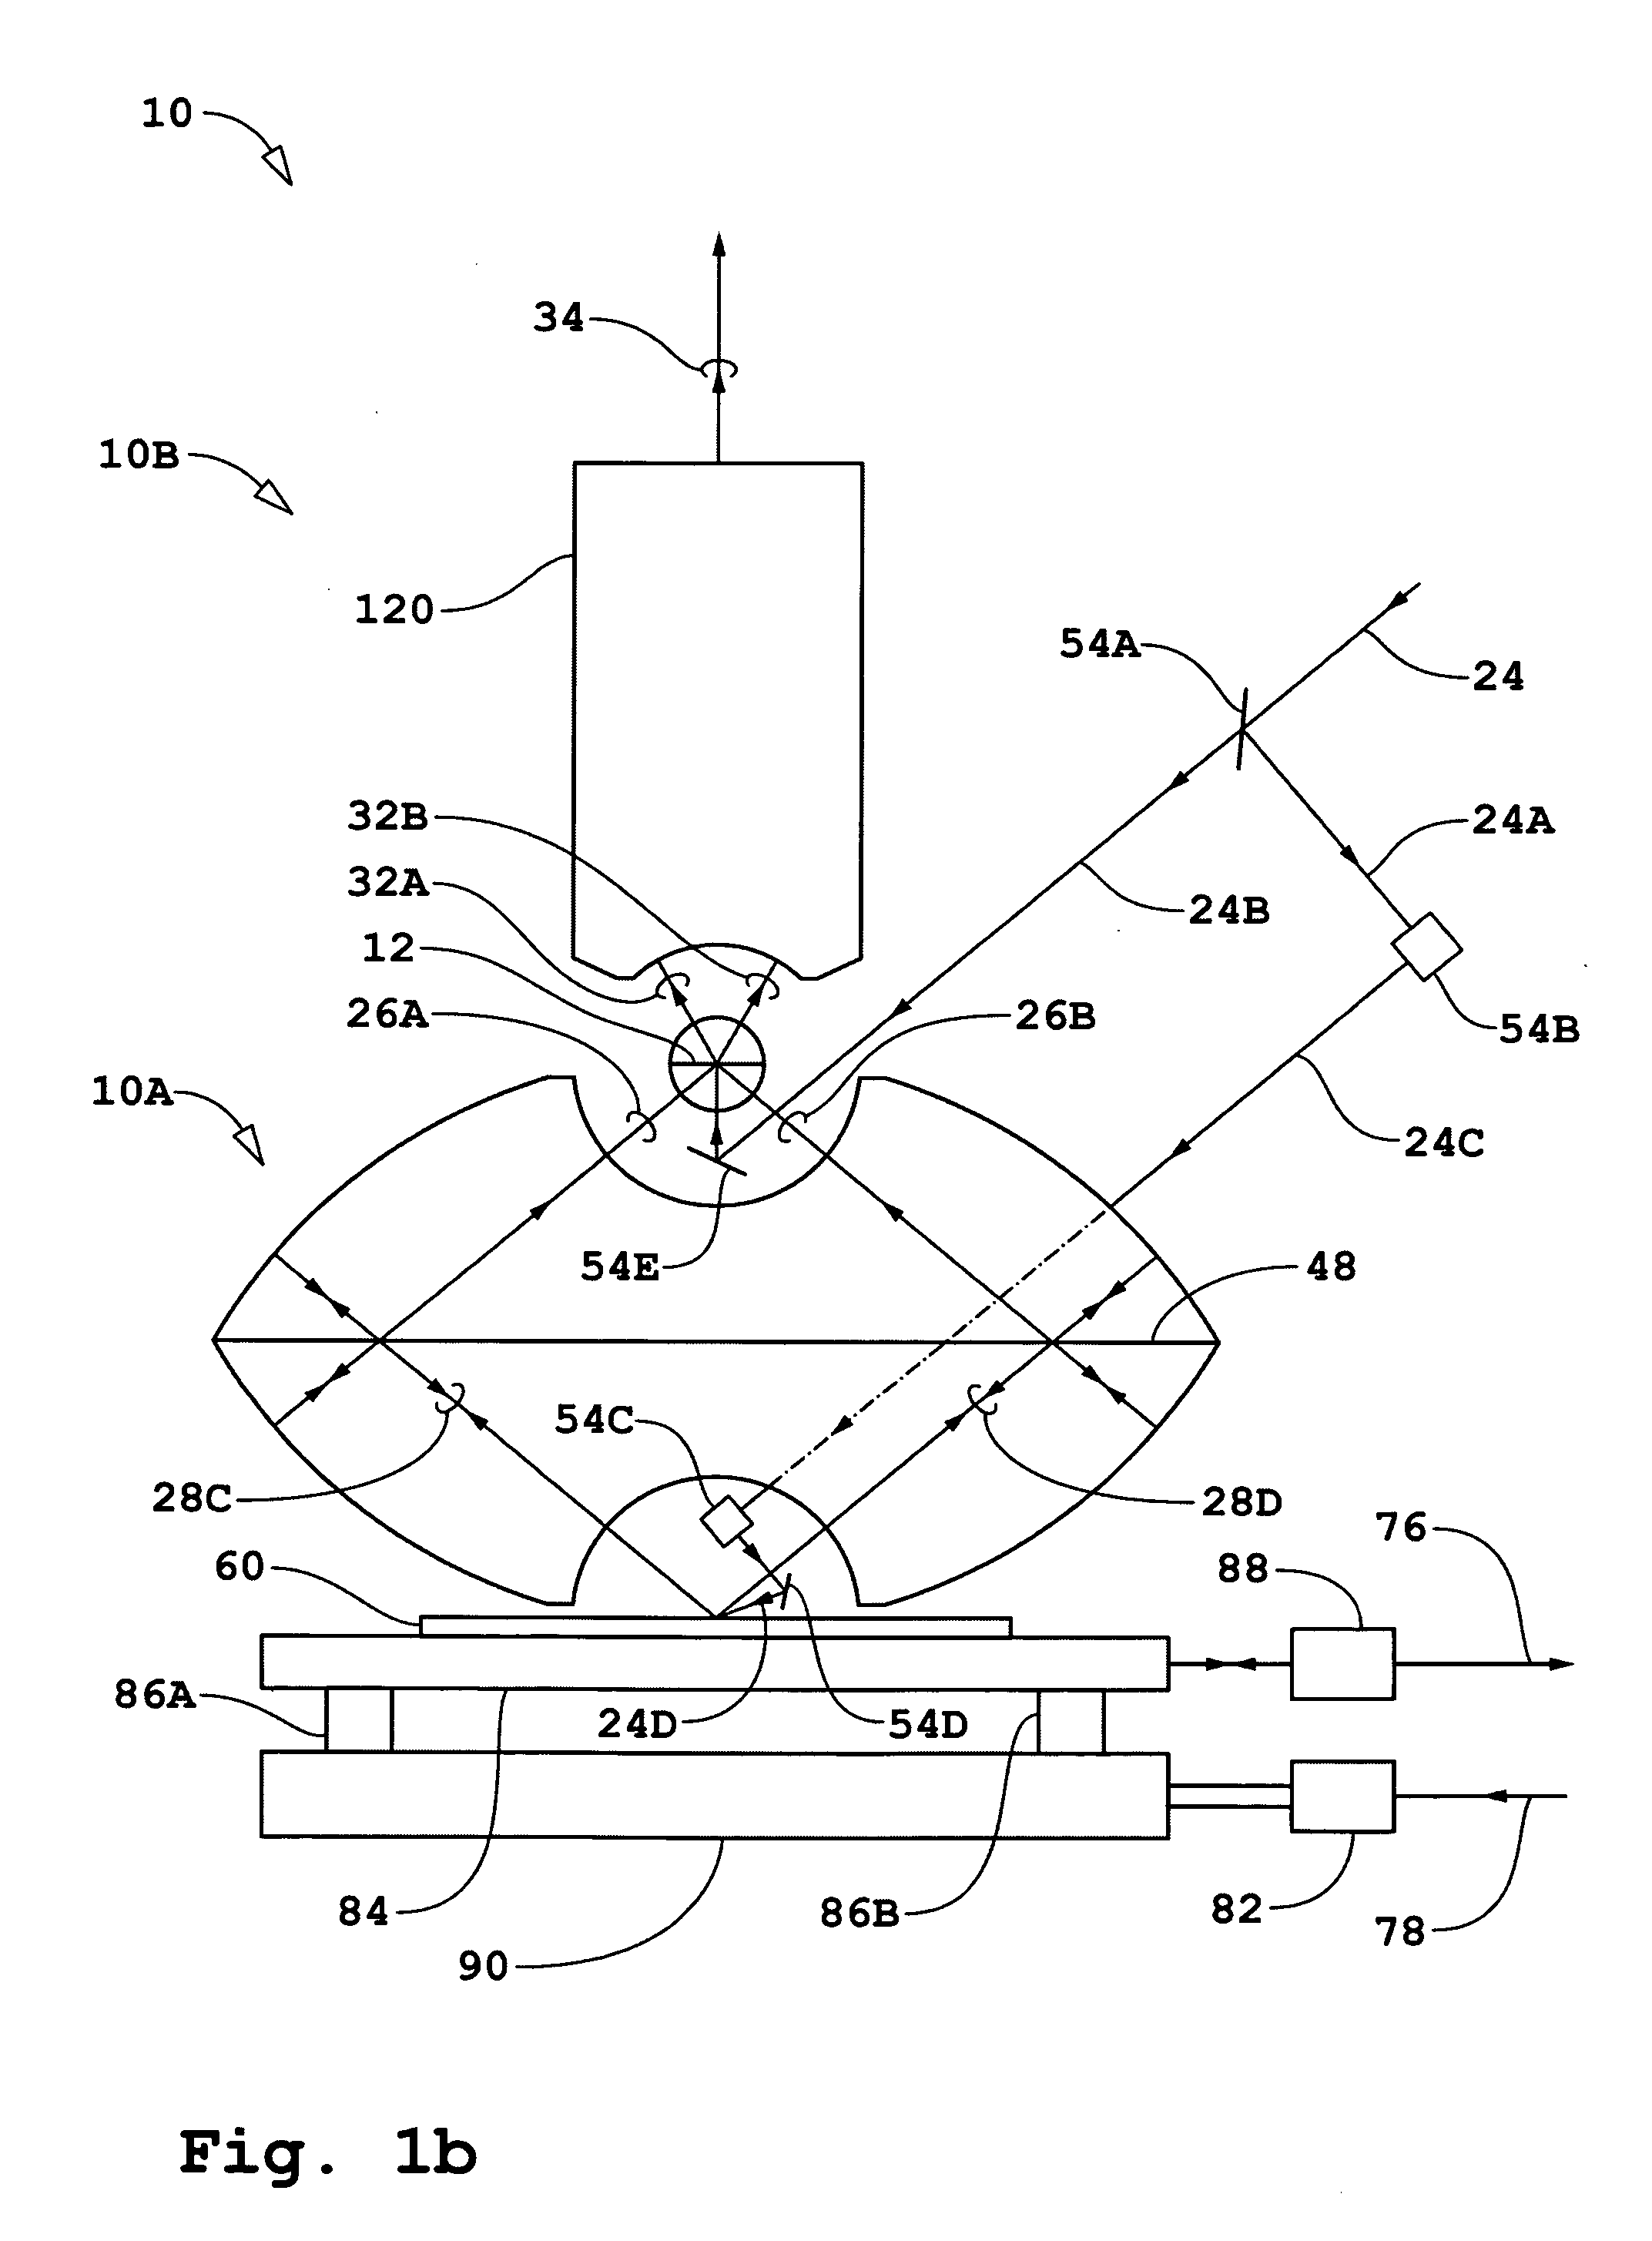 Catoptric and catadioptric imaging system with pellicle and aperture-array beam-splitters and non-adaptive and adaptive catoptric surfaces